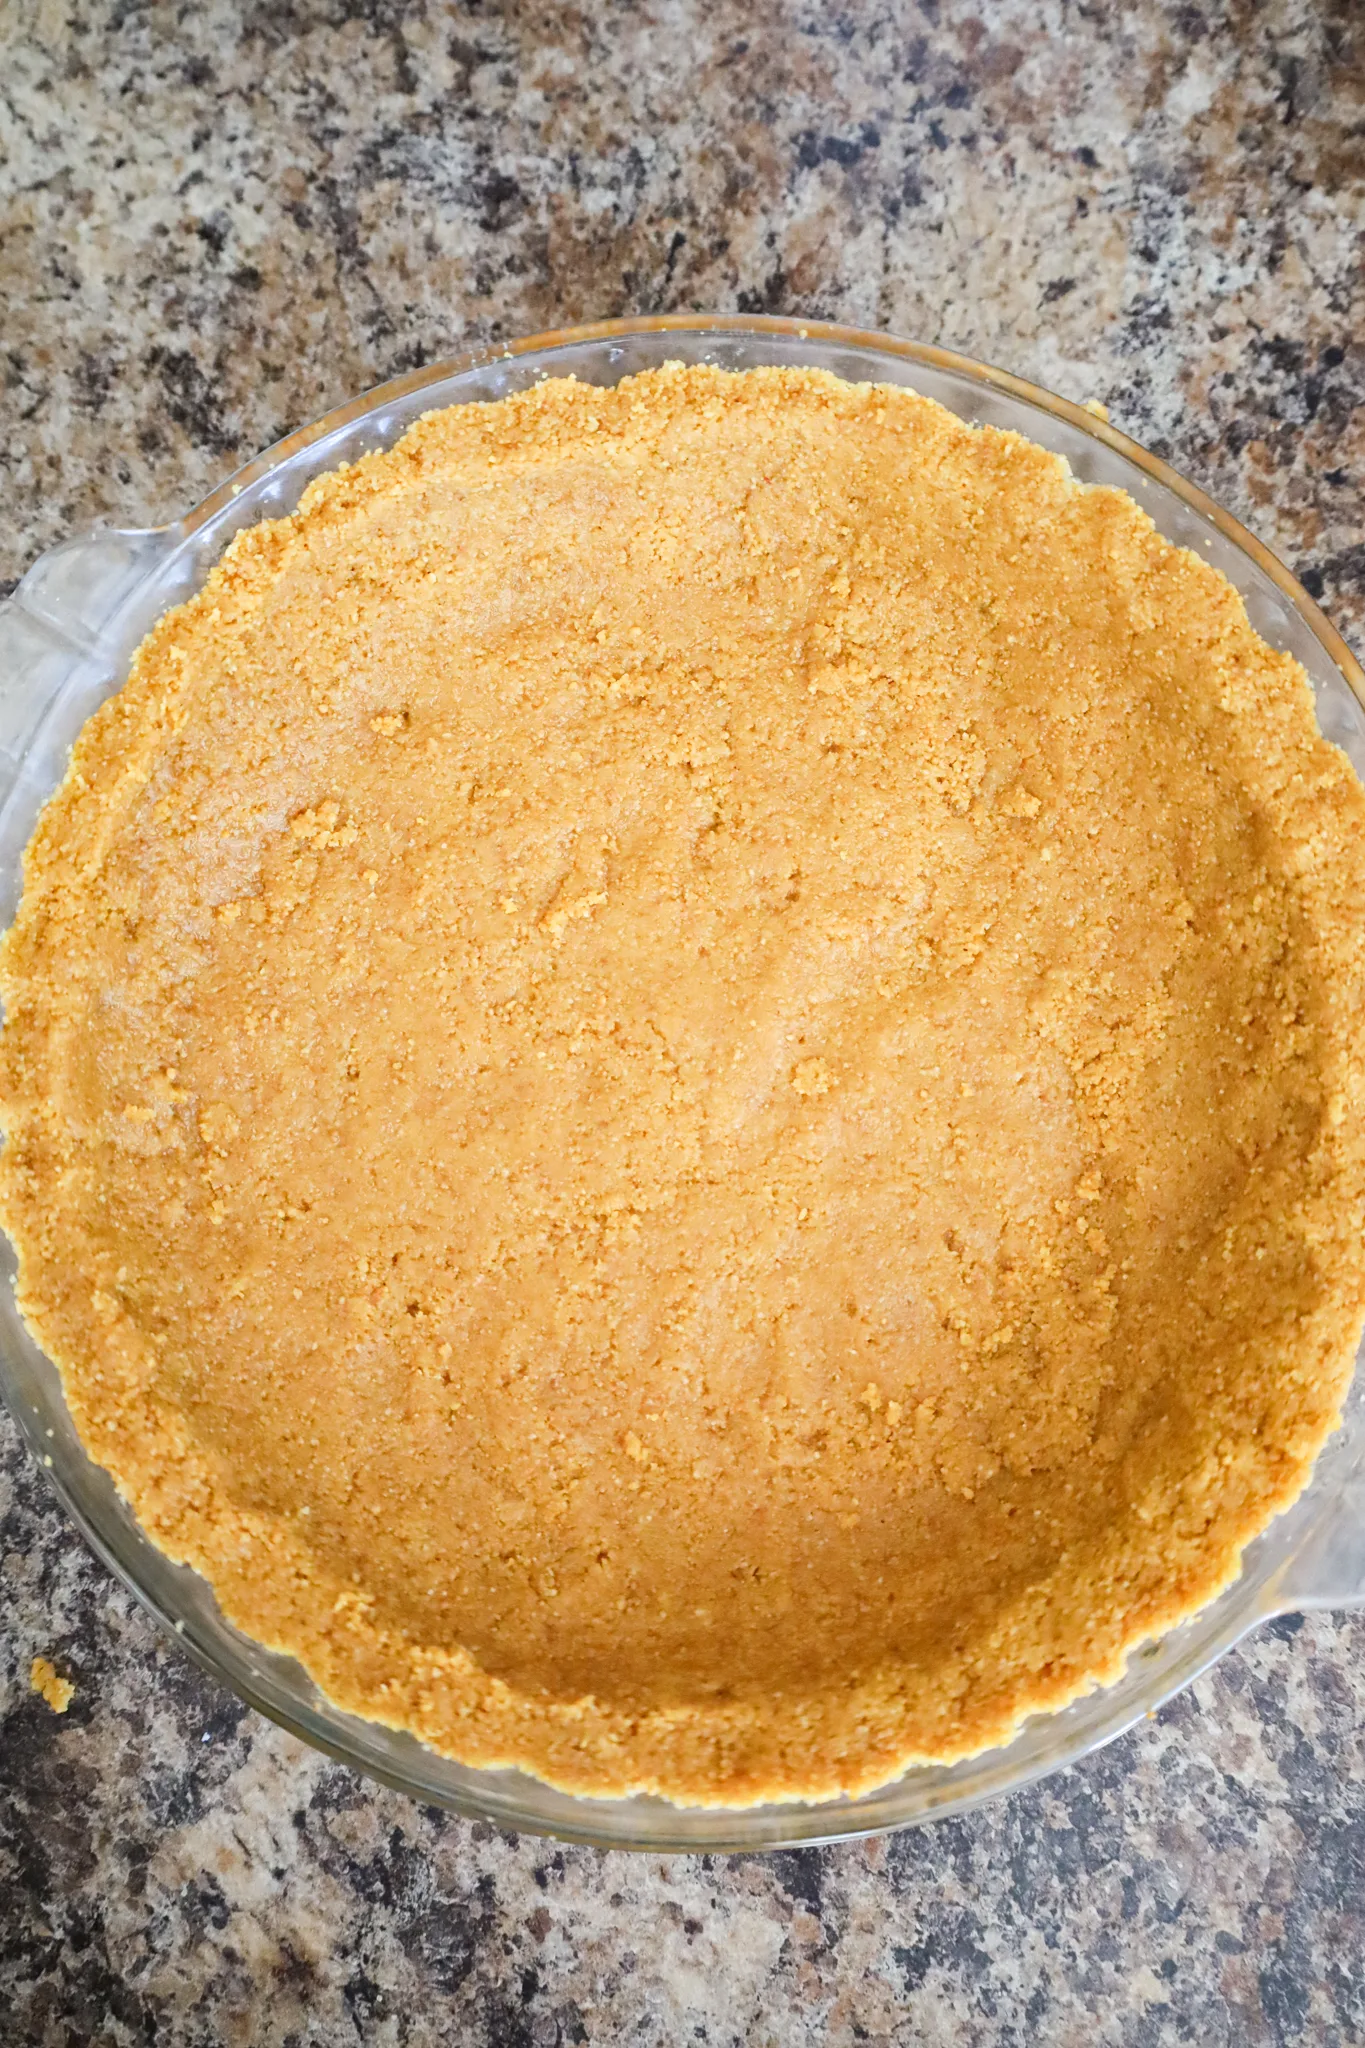 graham crumb mixture pressed into a pie plate